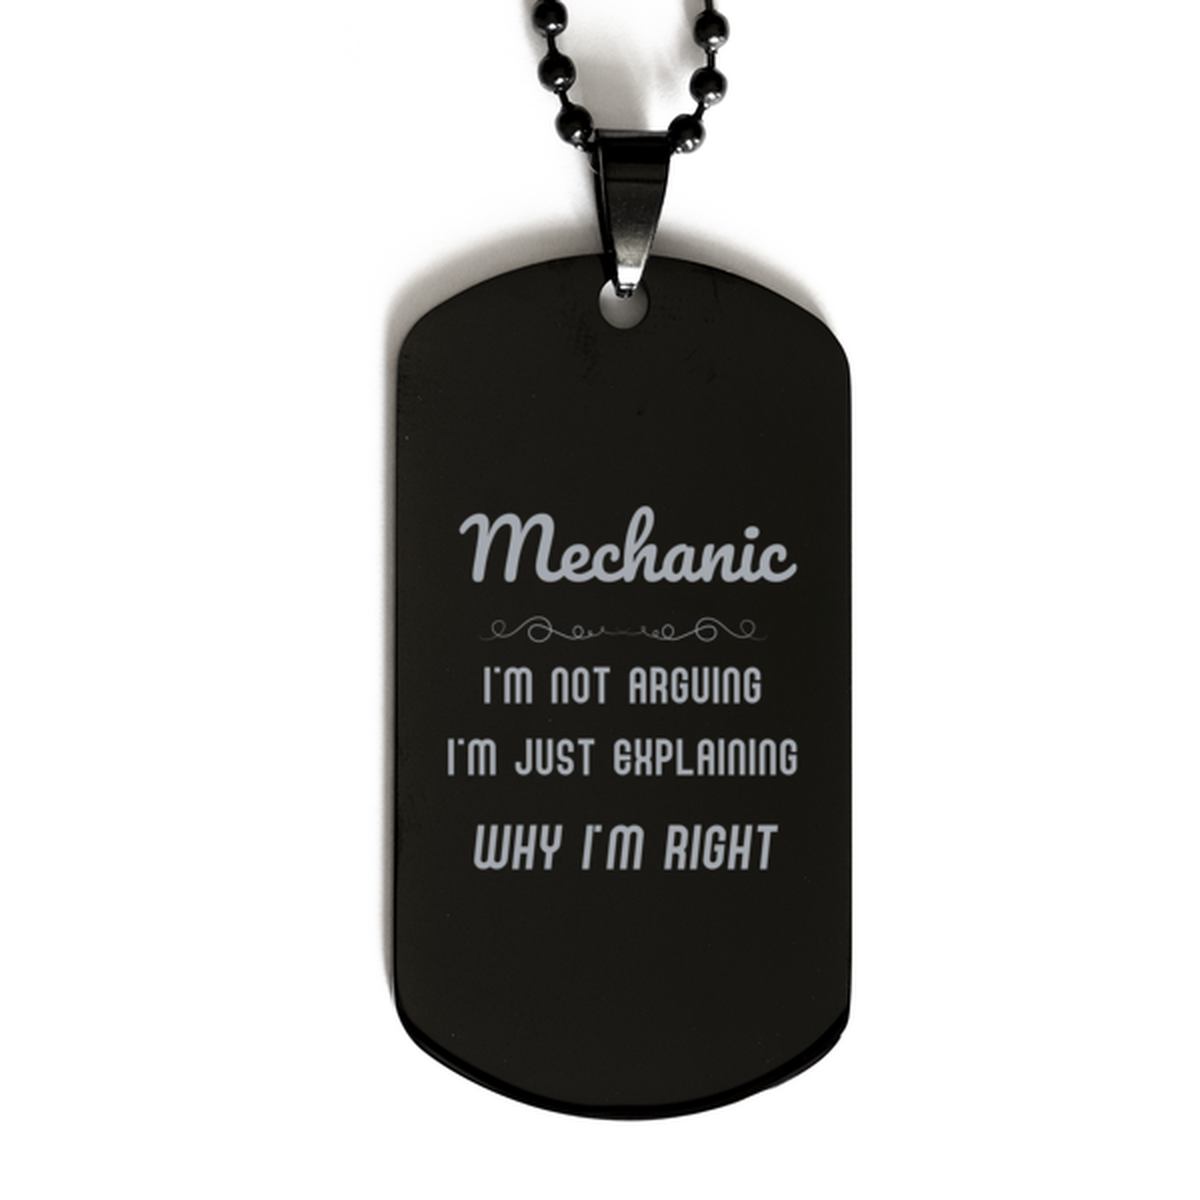 Mechanic I'm not Arguing. I'm Just Explaining Why I'm RIGHT Black Dog Tag, Funny Saying Quote Mechanic Gifts For Mechanic Graduation Birthday Christmas Gifts for Men Women Coworker